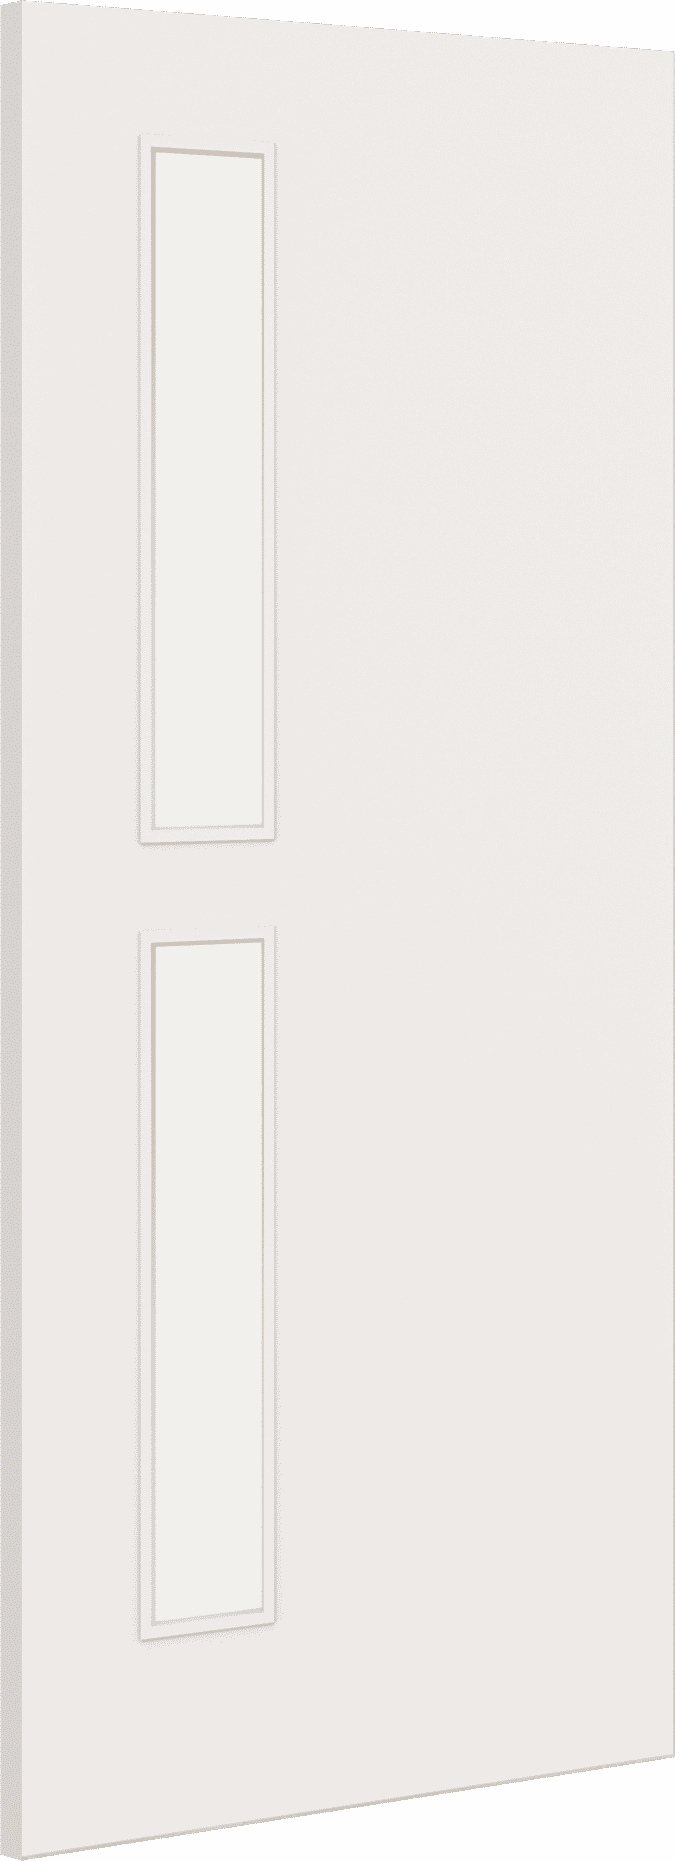 2040mm x 626mm x 44mm Architectural Paint Grade White 07 Frosted Glazed Fire Door Blank